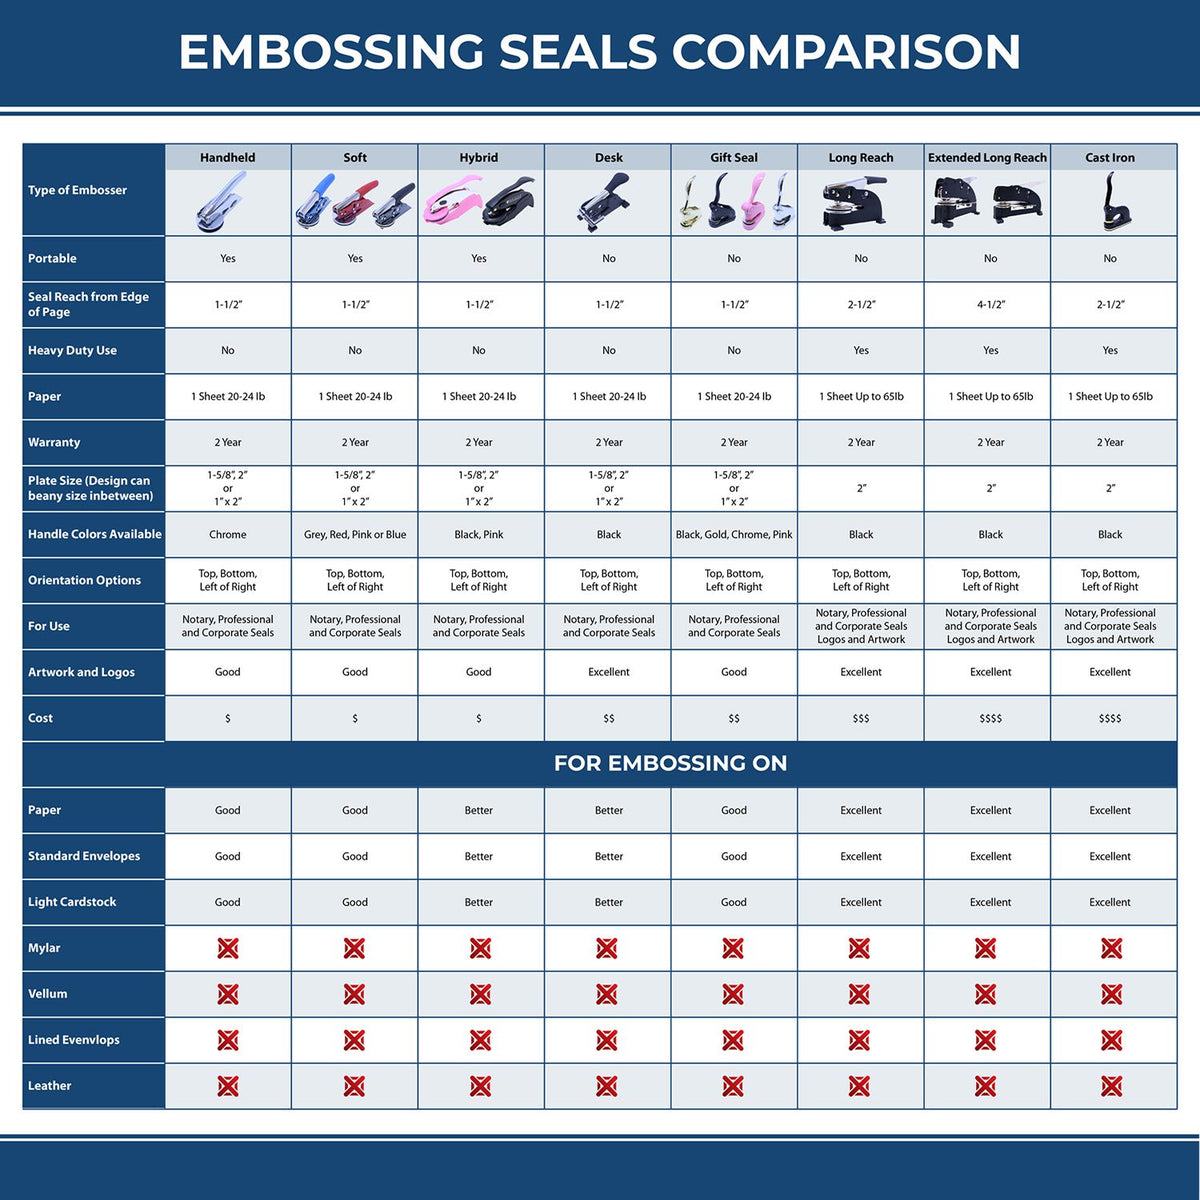 A comparison chart for the different types of mount models available for the Soft Pennsylvania Professional Engineer Seal.